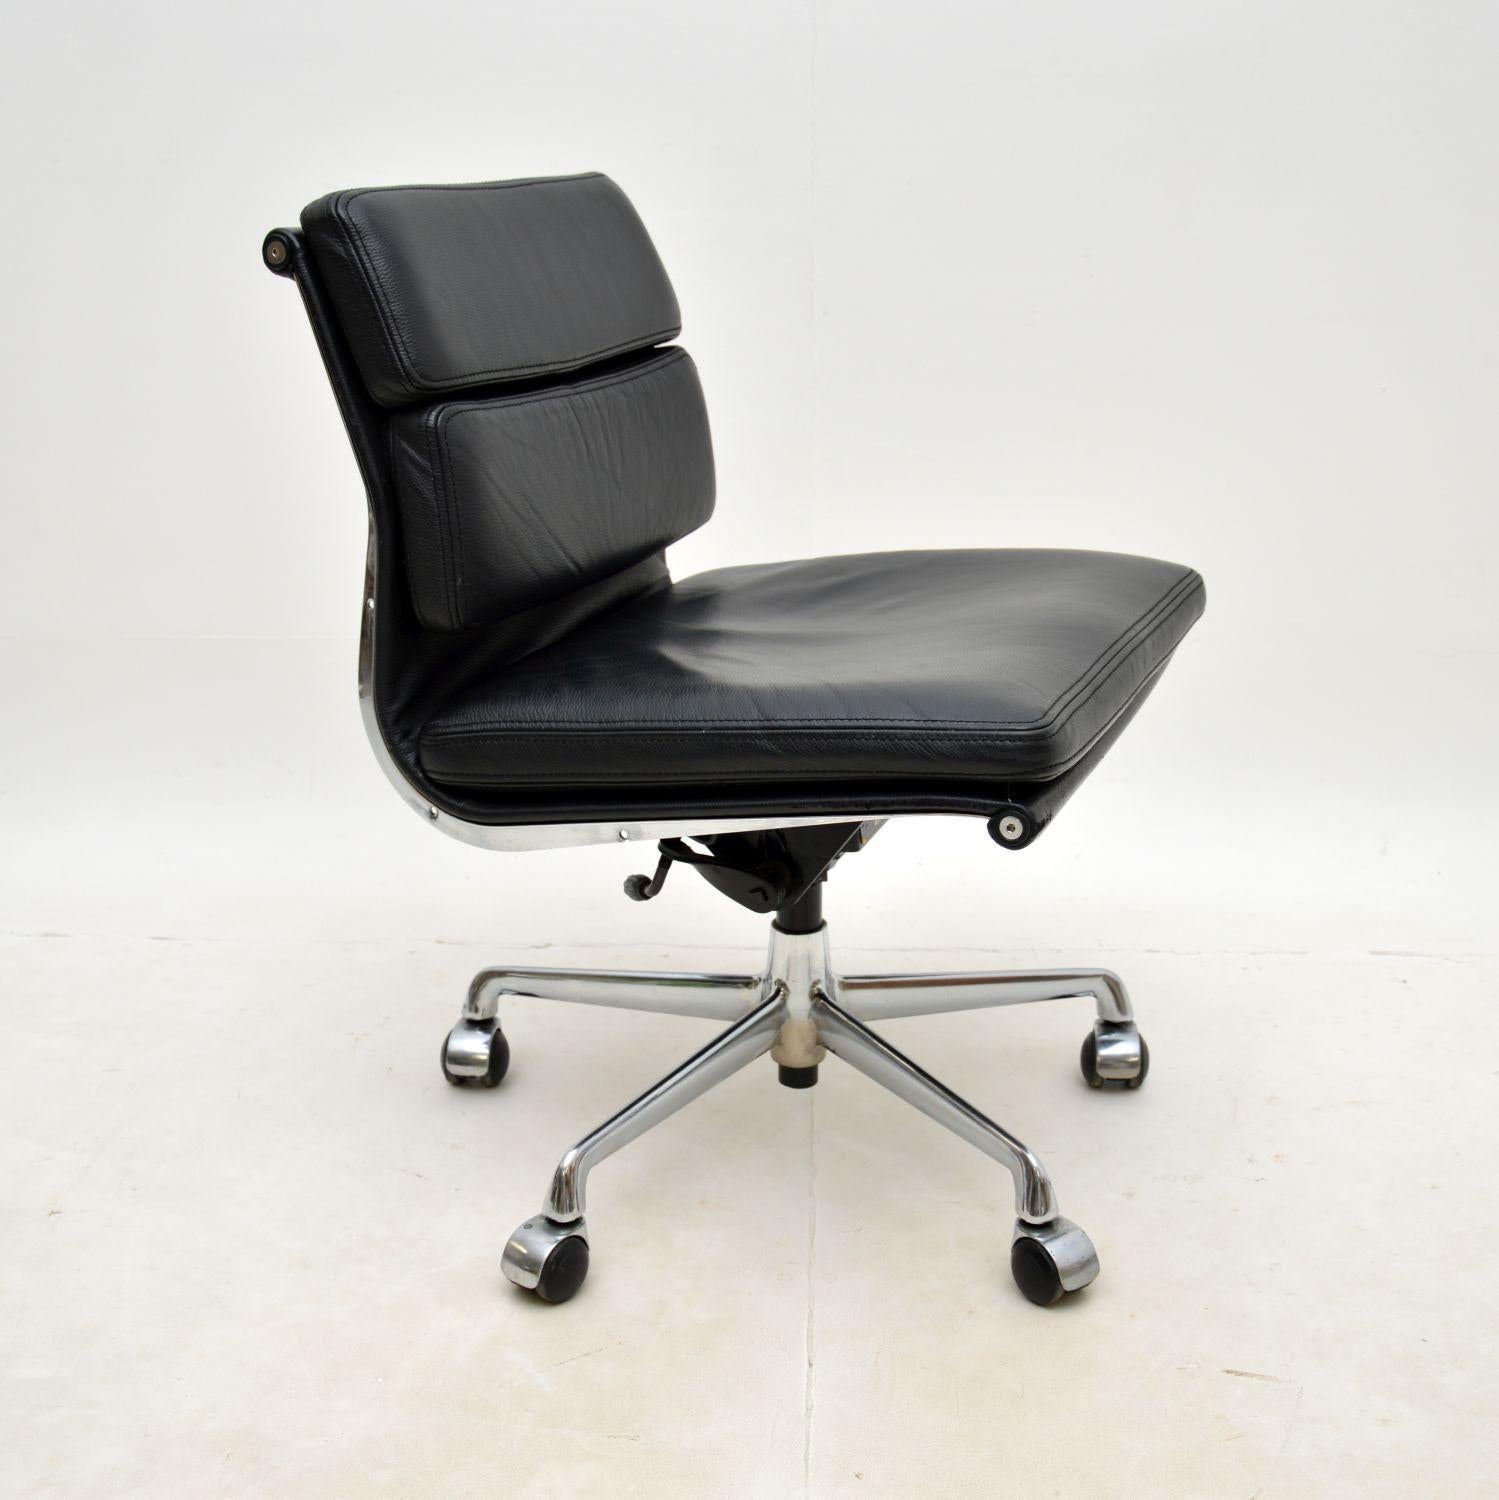 Italian Vintage Eames Soft Pad Leather Desk Chair by ICF